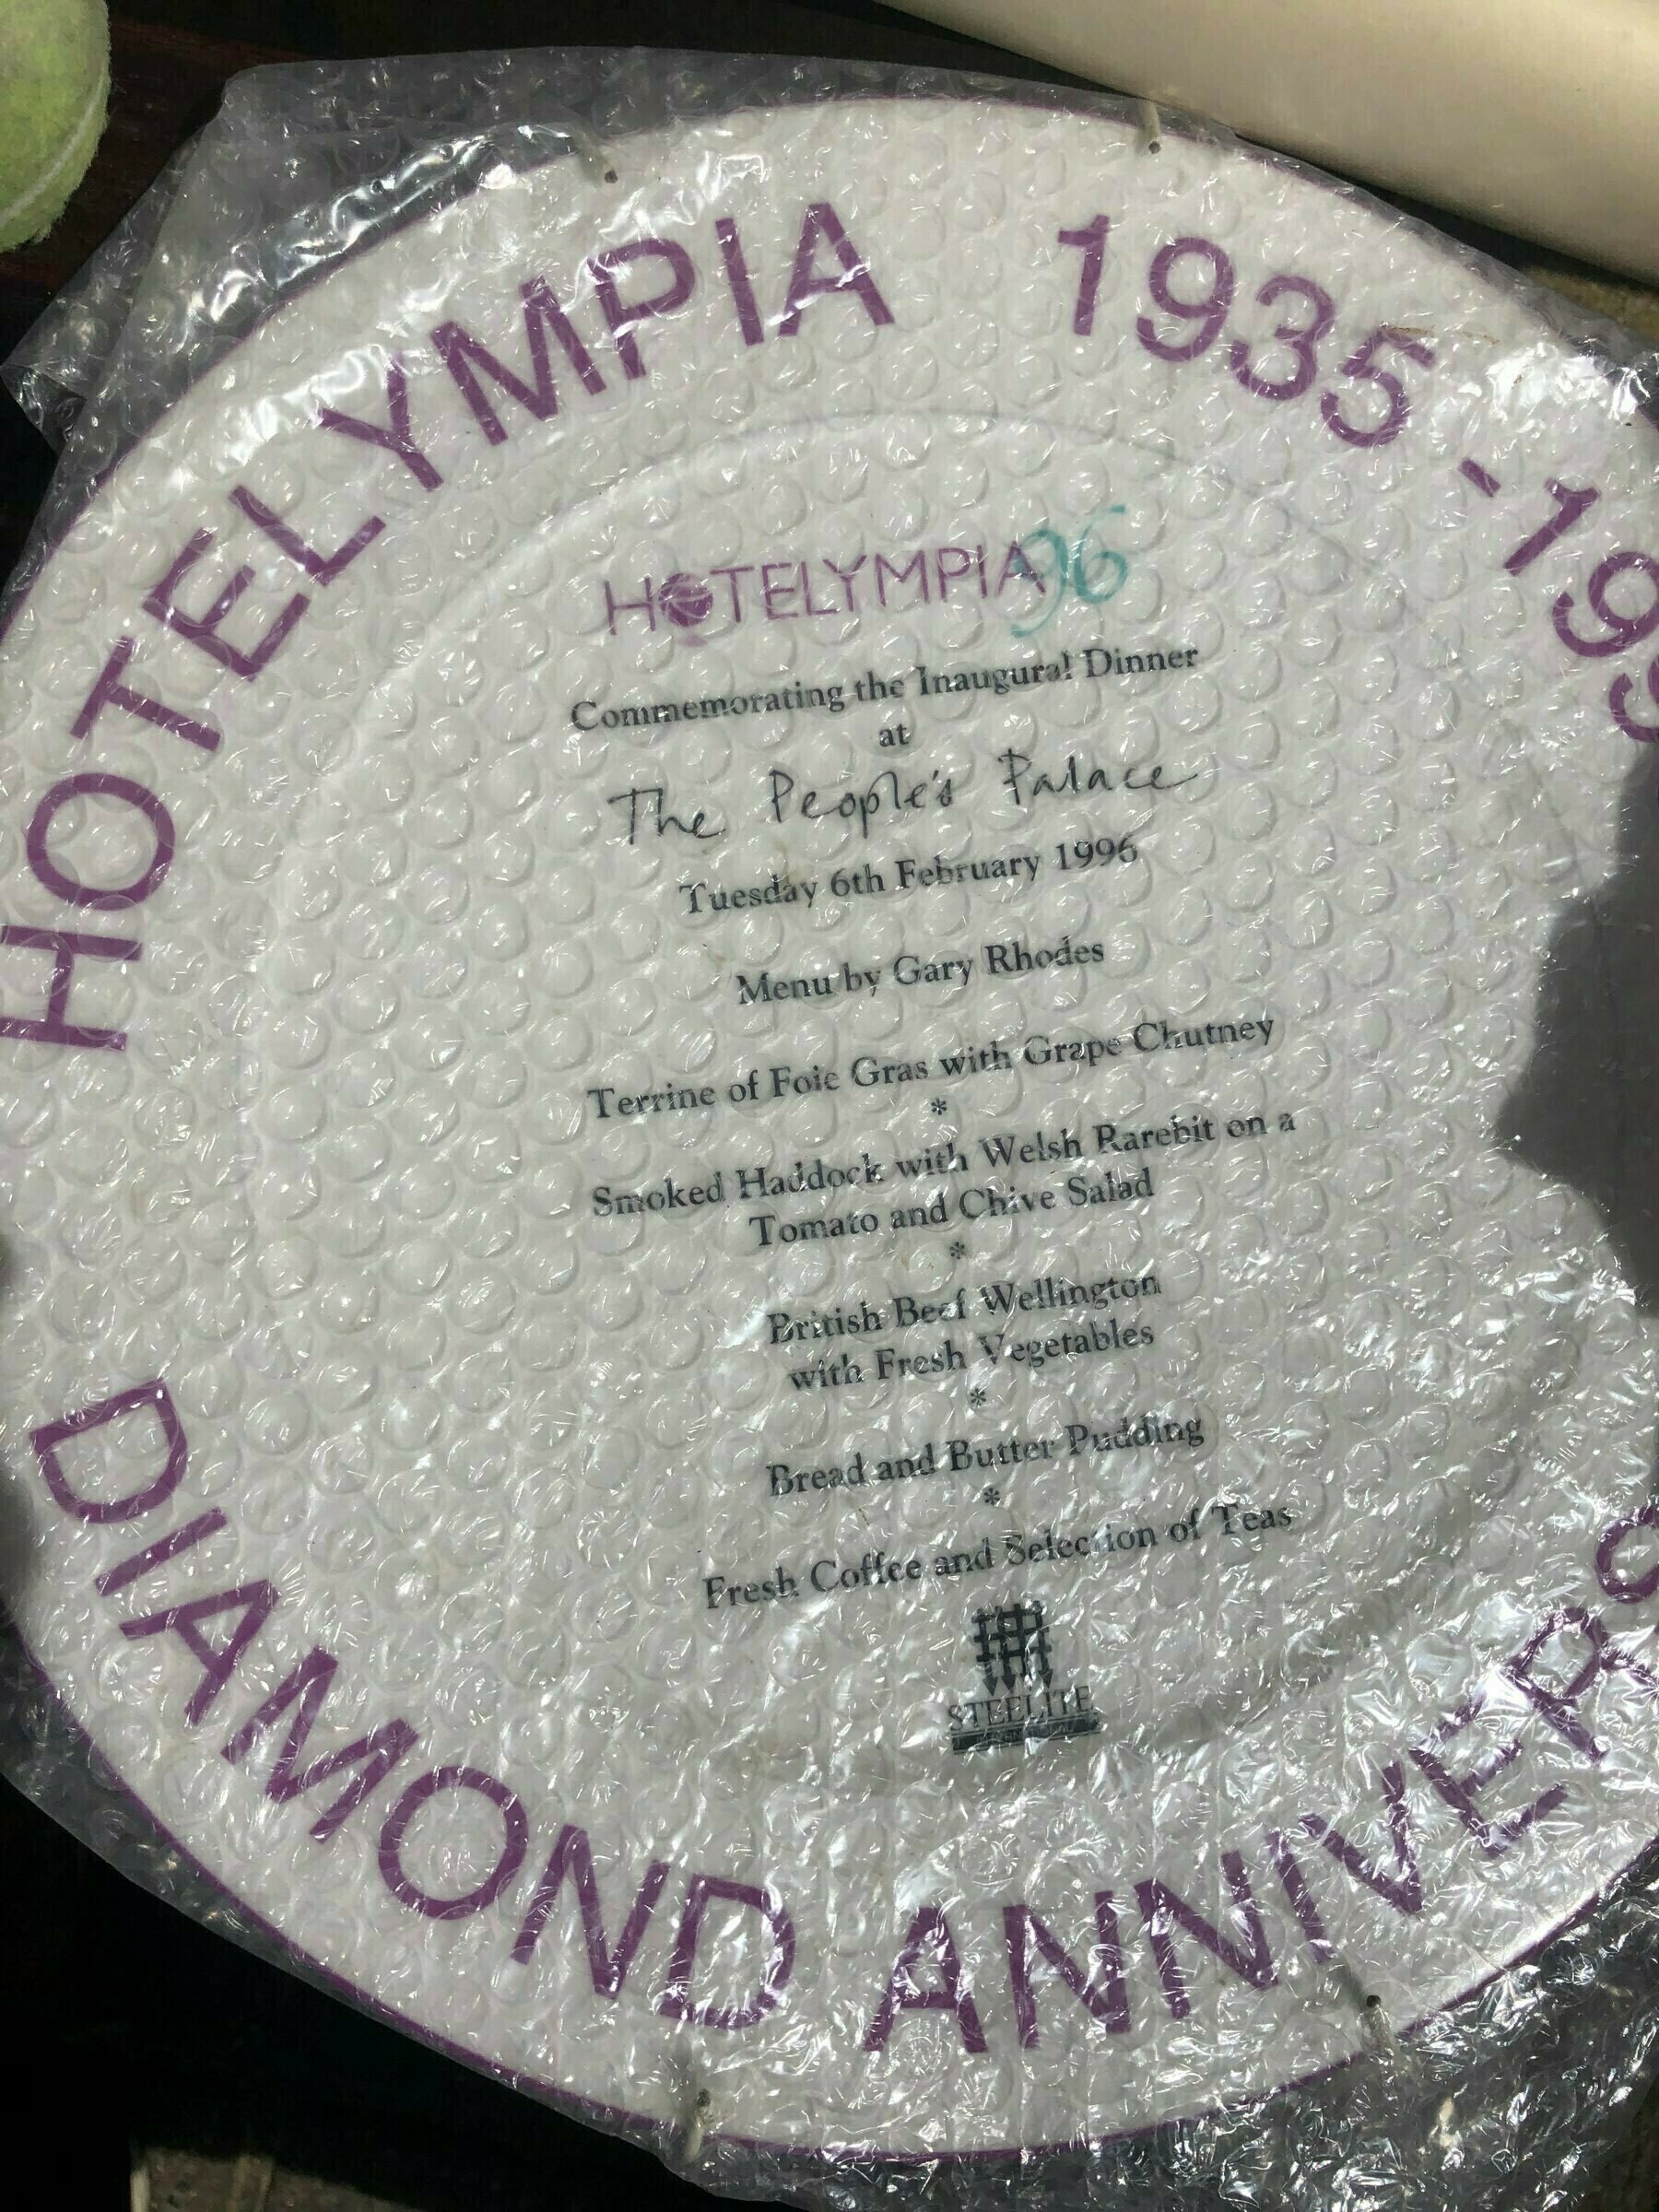 A Hotelympia commemorative playe from 1996, featuring a Gary Rhodes meal. 